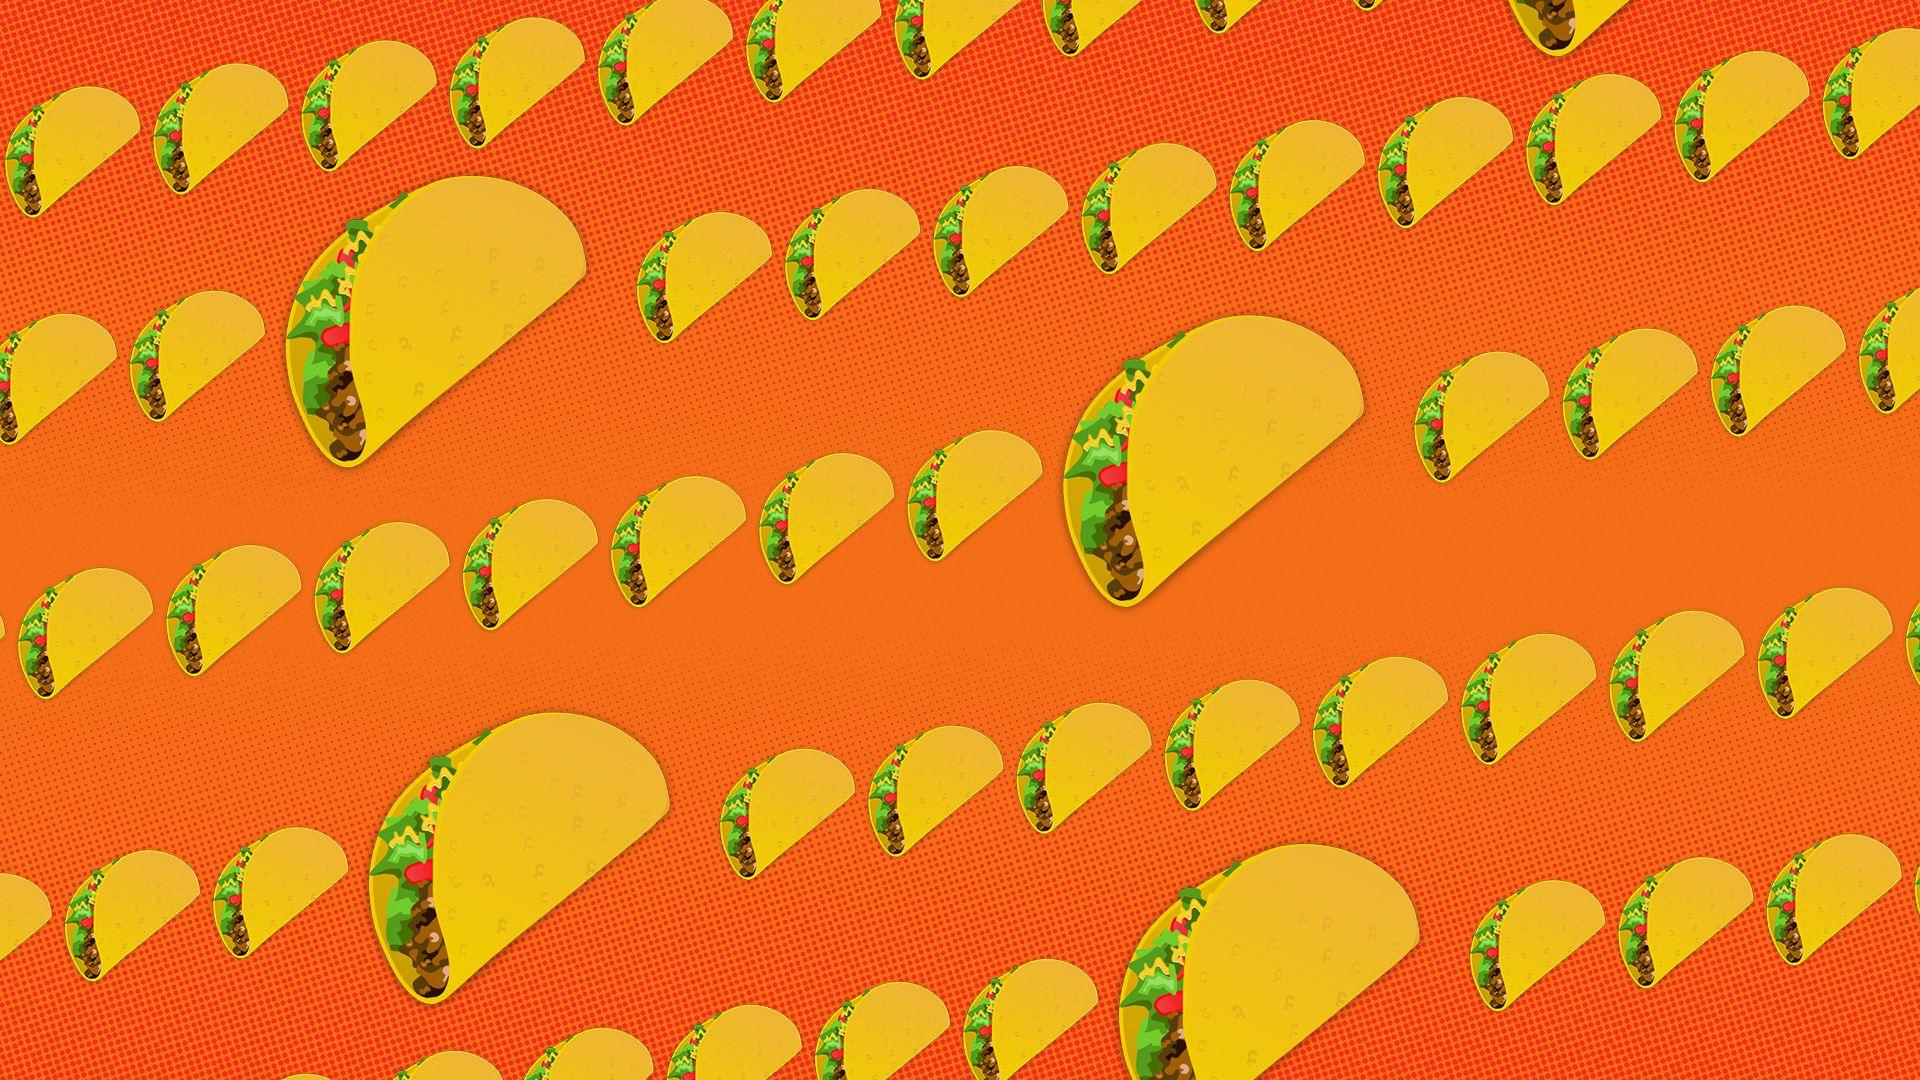 Taco Bell Wallpaper, PC Taco Bell Wallpapers Most Beautiful Wallpaper